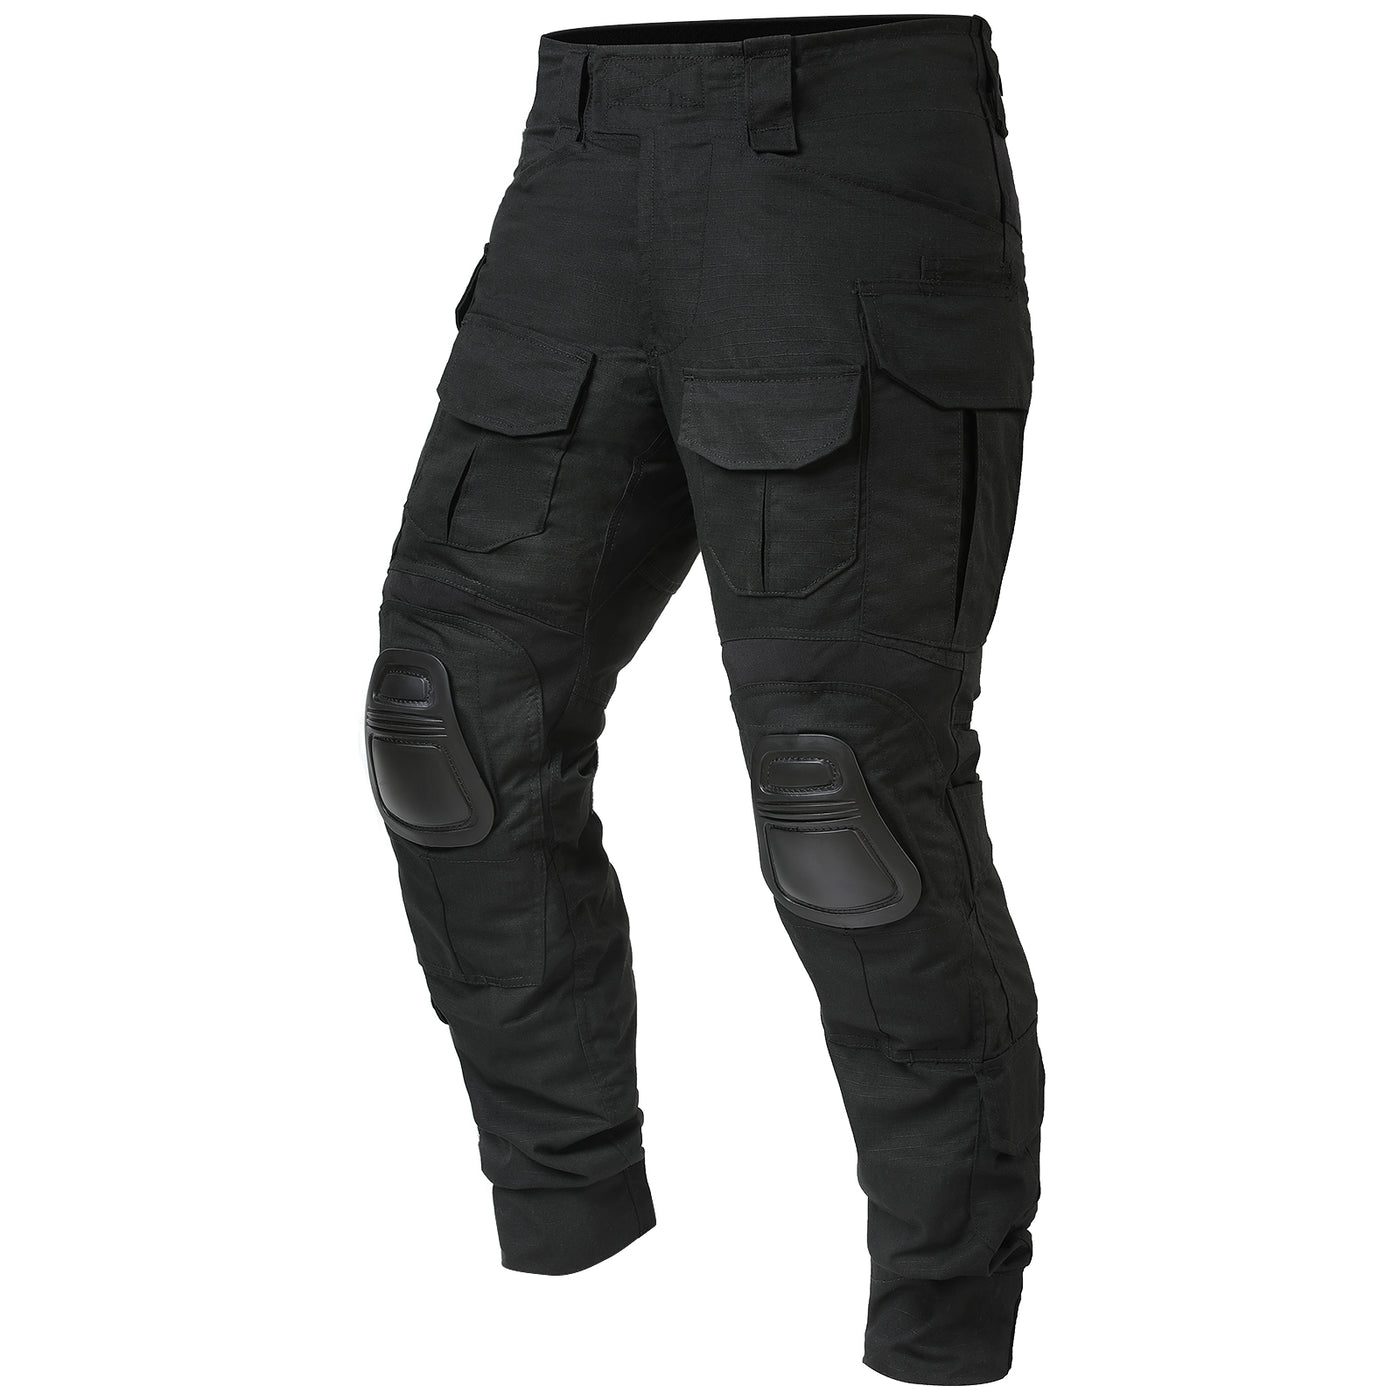 Buy black tactical pants Online in INDIA at Low Prices at desertcart